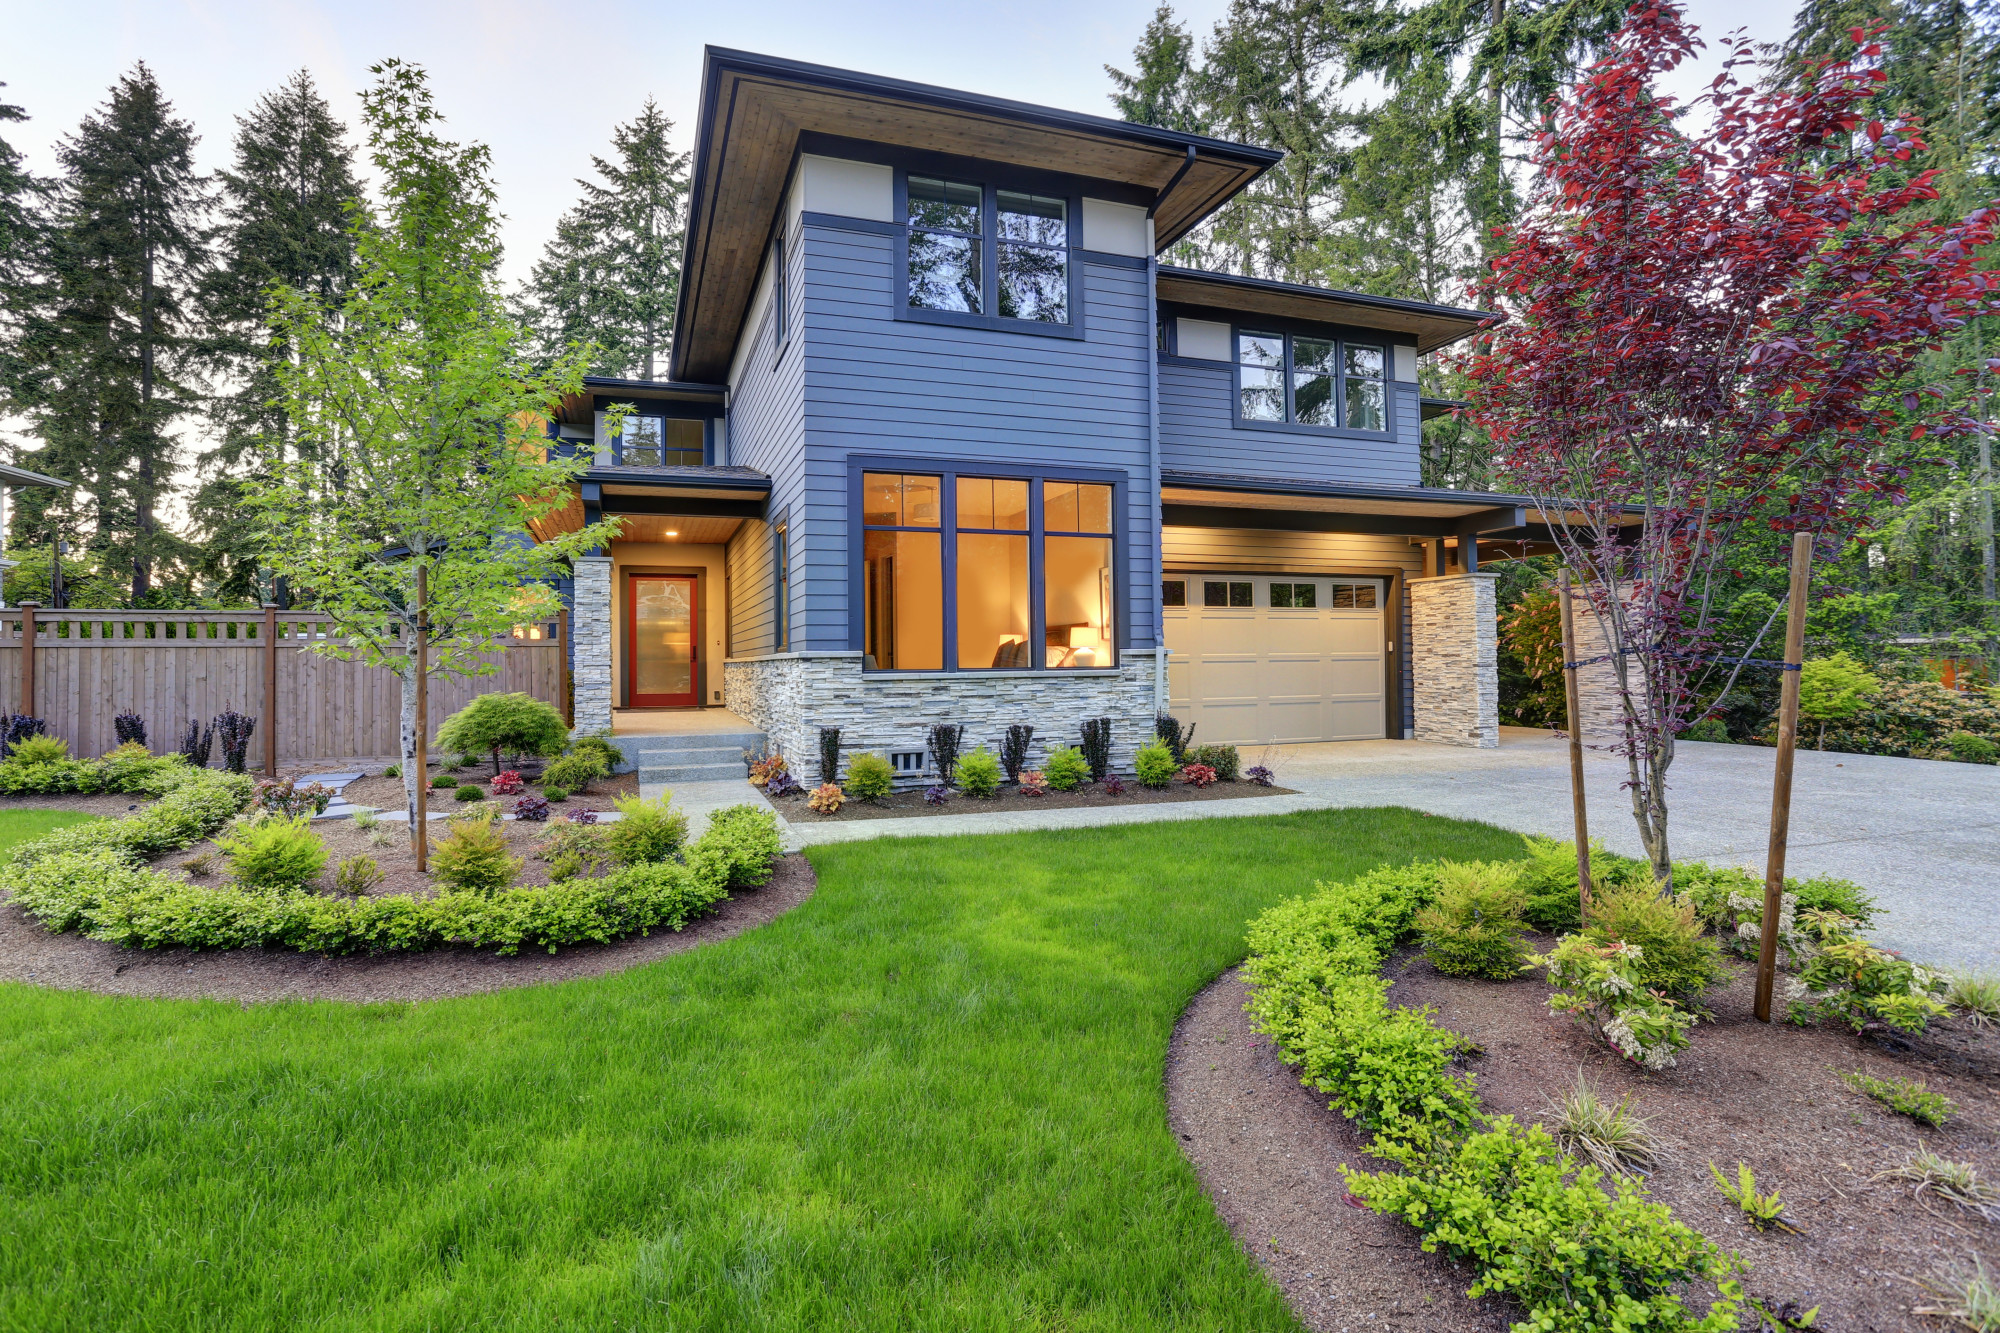 How to Increase Curb Appeal: 5 Tips for Homeowners